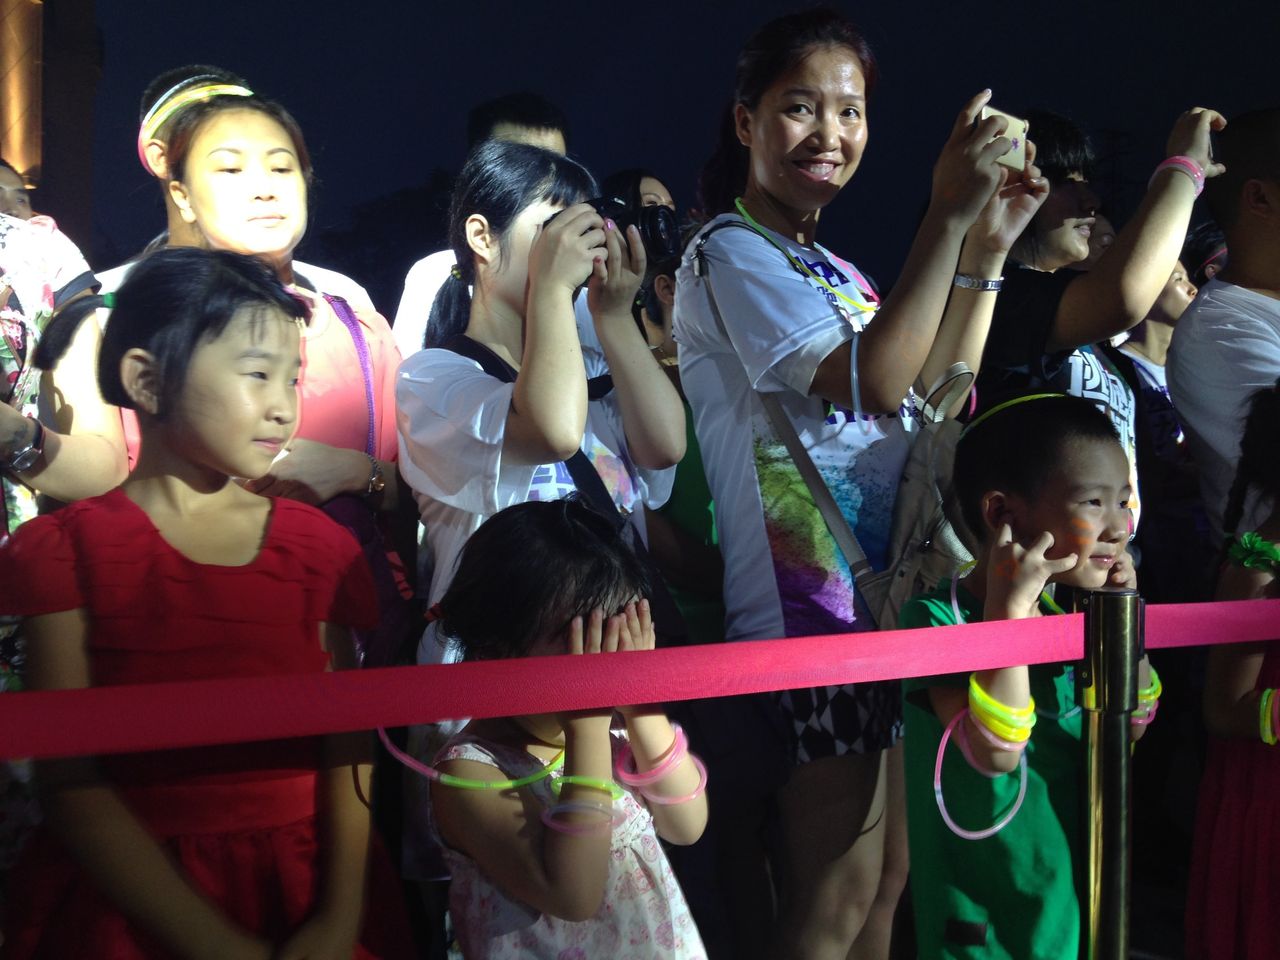 <p><span style="font-family: Arial, Helvetica, sans-serif; font-size: 14px; line-height: 20px; background-color: #eeeeee;">Fans of Fat Shady gather at a show marking the opening of the Golden Paris real estate development in Luzhou.</span></p>